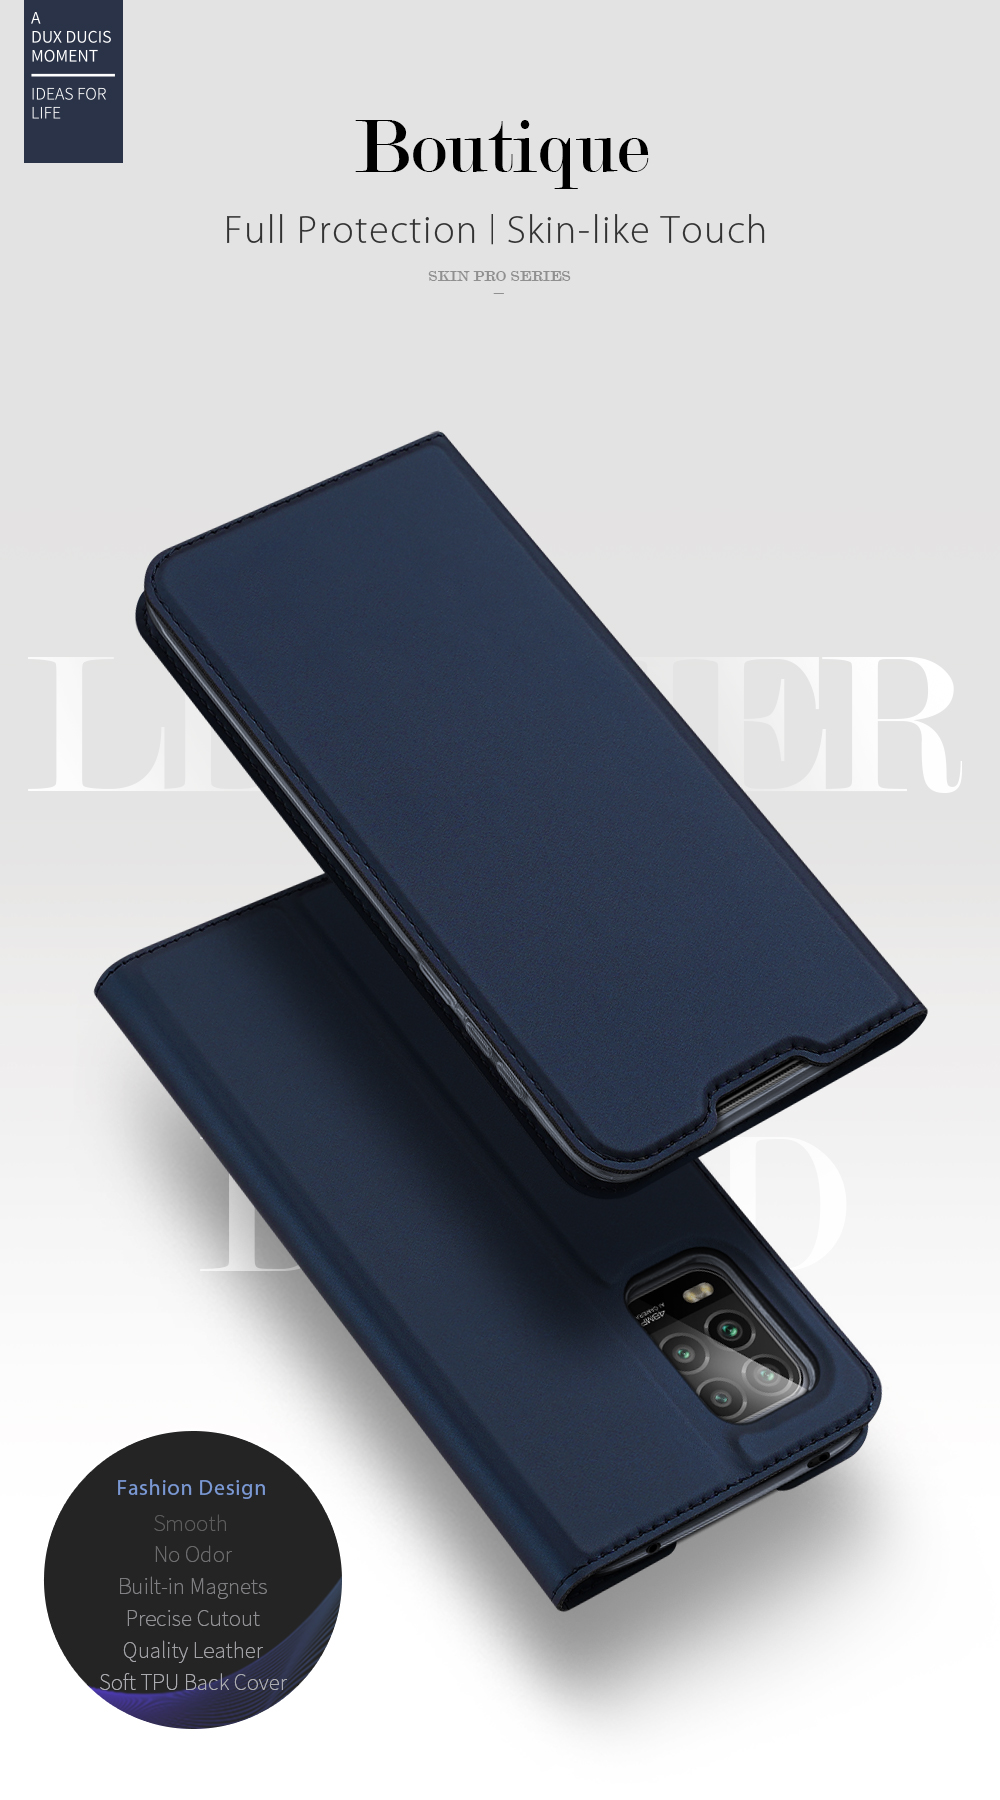 DUX-DUCIS-for-Xiaomi-Mi-10-Lite-Case-Flip-Magnetic-with-Card-Slot-Stand-Shockproof-PU-Leather-Protec-1697527-1